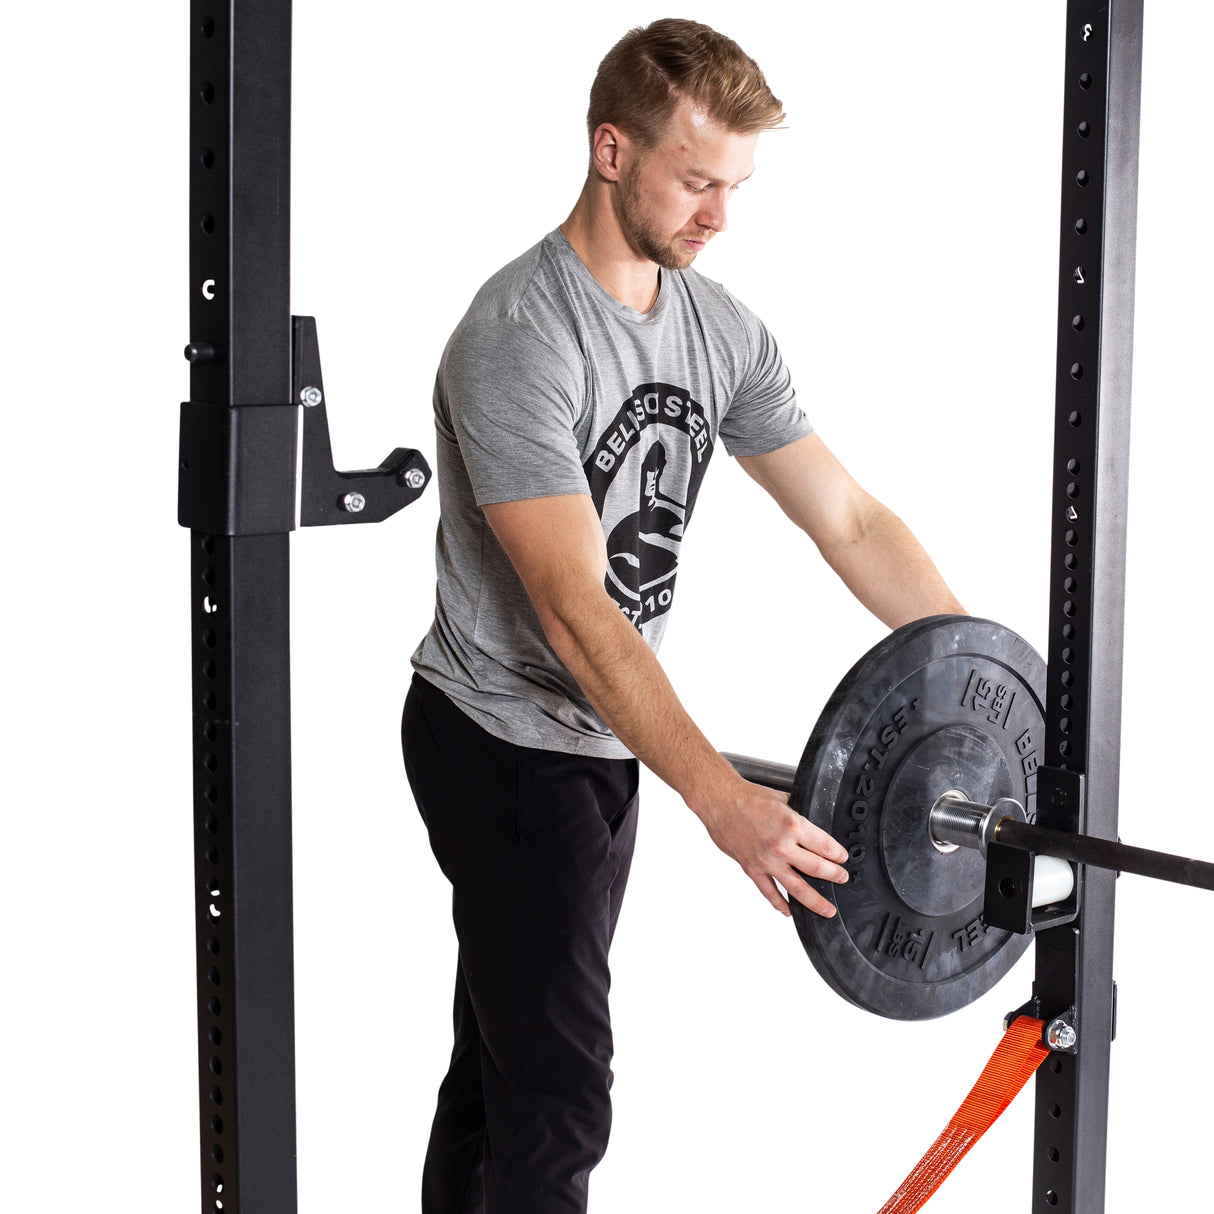 Male athlete putting All-Black Bumper Plates on barbell